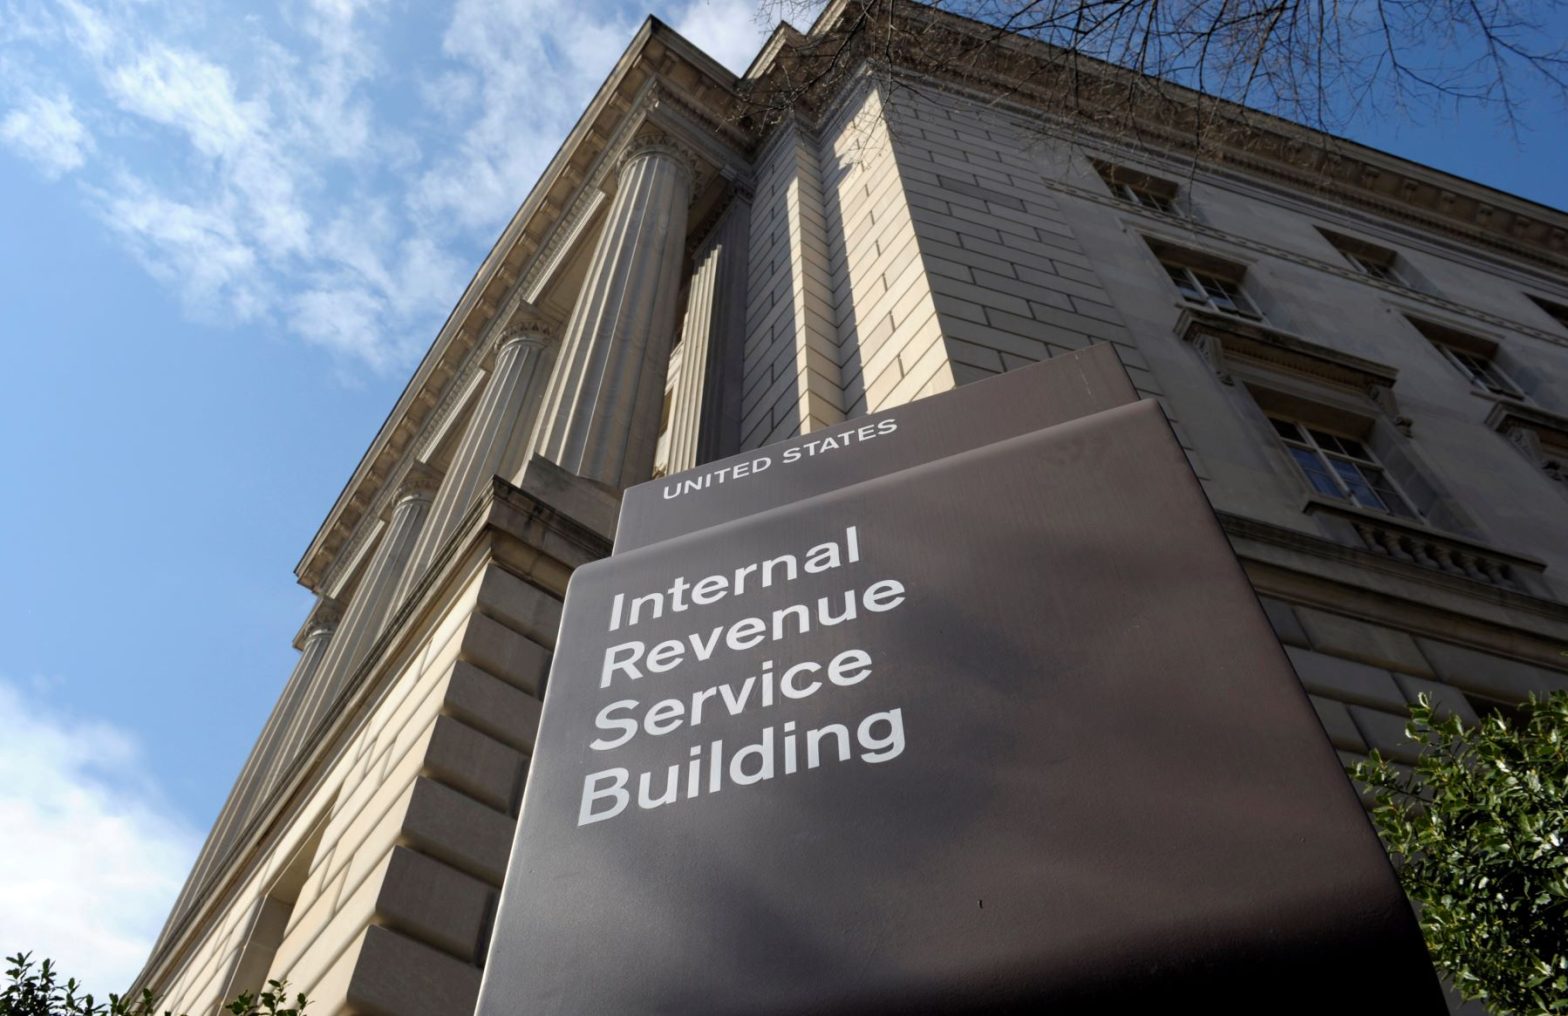 Administration Scaling Back Plan to Deepen IRS Scrutiny Into Bank Accounts